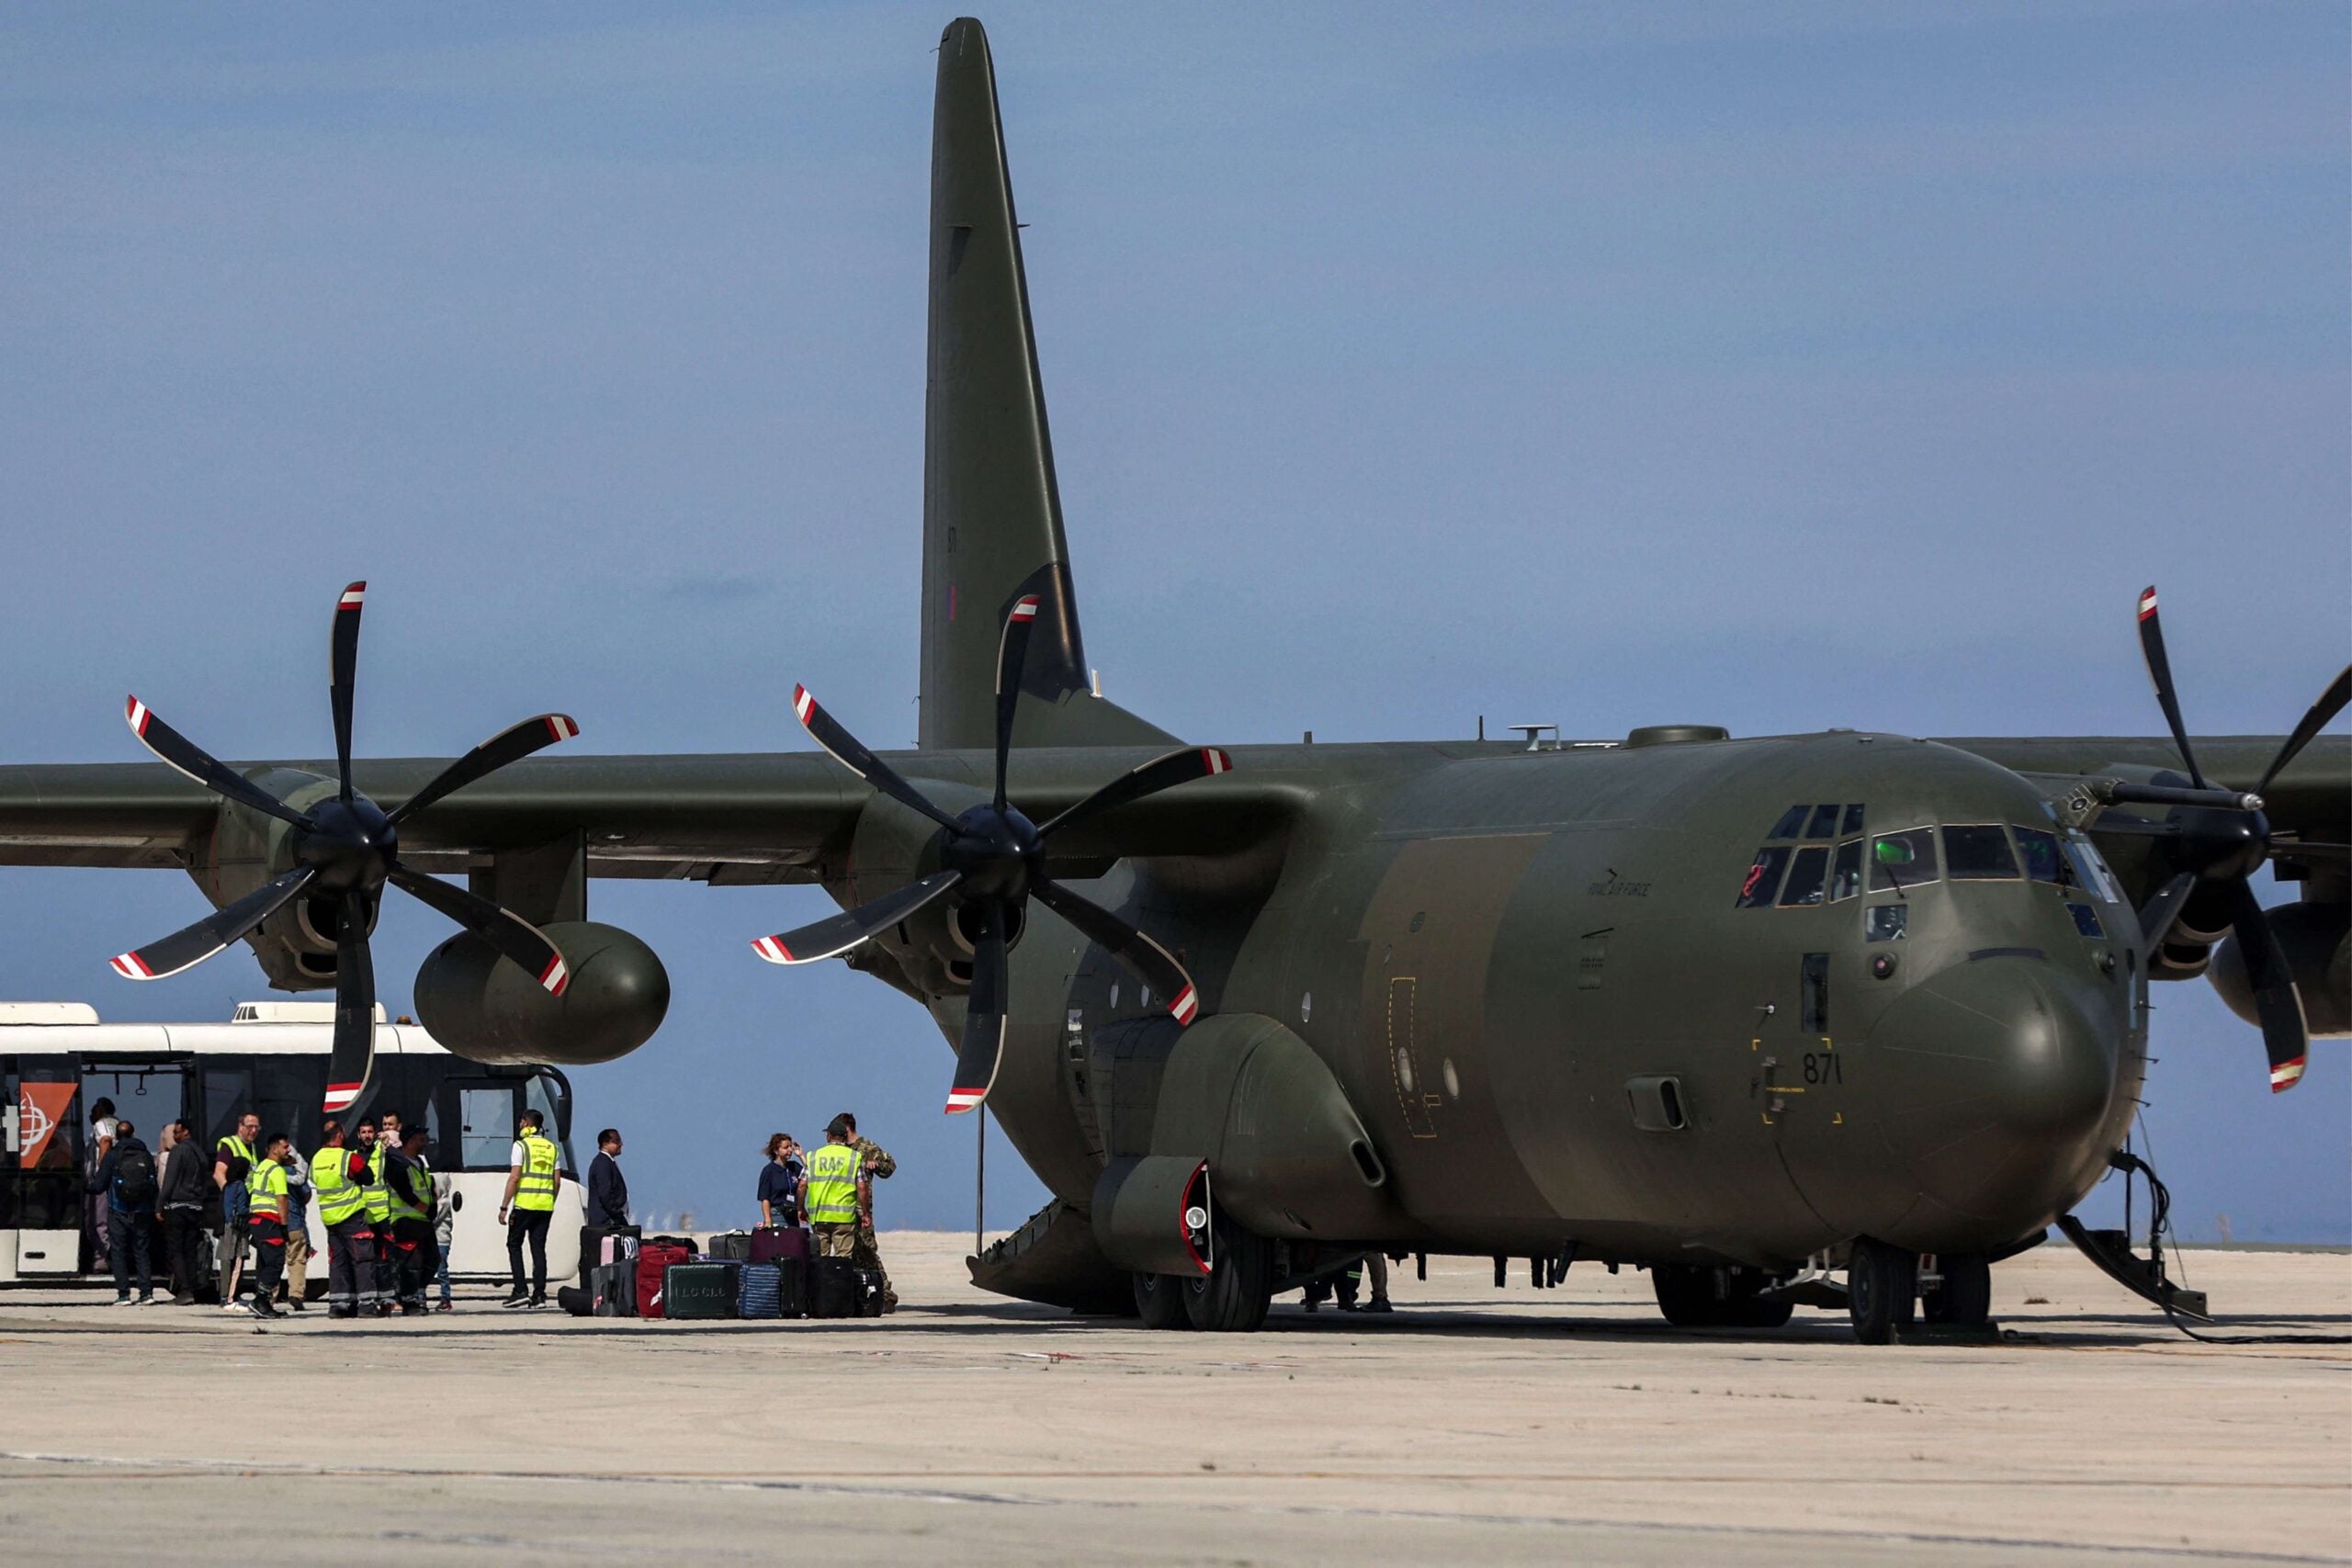 A British Royal Air Force C-130 Hercules military transport that was carrying evacuees from Sudan is pictured on the tarmac at Larnaca International Airport in Cyprus on April 26, 2023. - Multiple nations have scrambled to evacuate embassy staff and citizens by road, air and sea from chaos-torn Sudan, where fighting between the army and paramilitaries has killed hundreds. (Photo by Christina ASSI / AFP) (Photo by CHRISTINA ASSI/AFP via Getty Images)